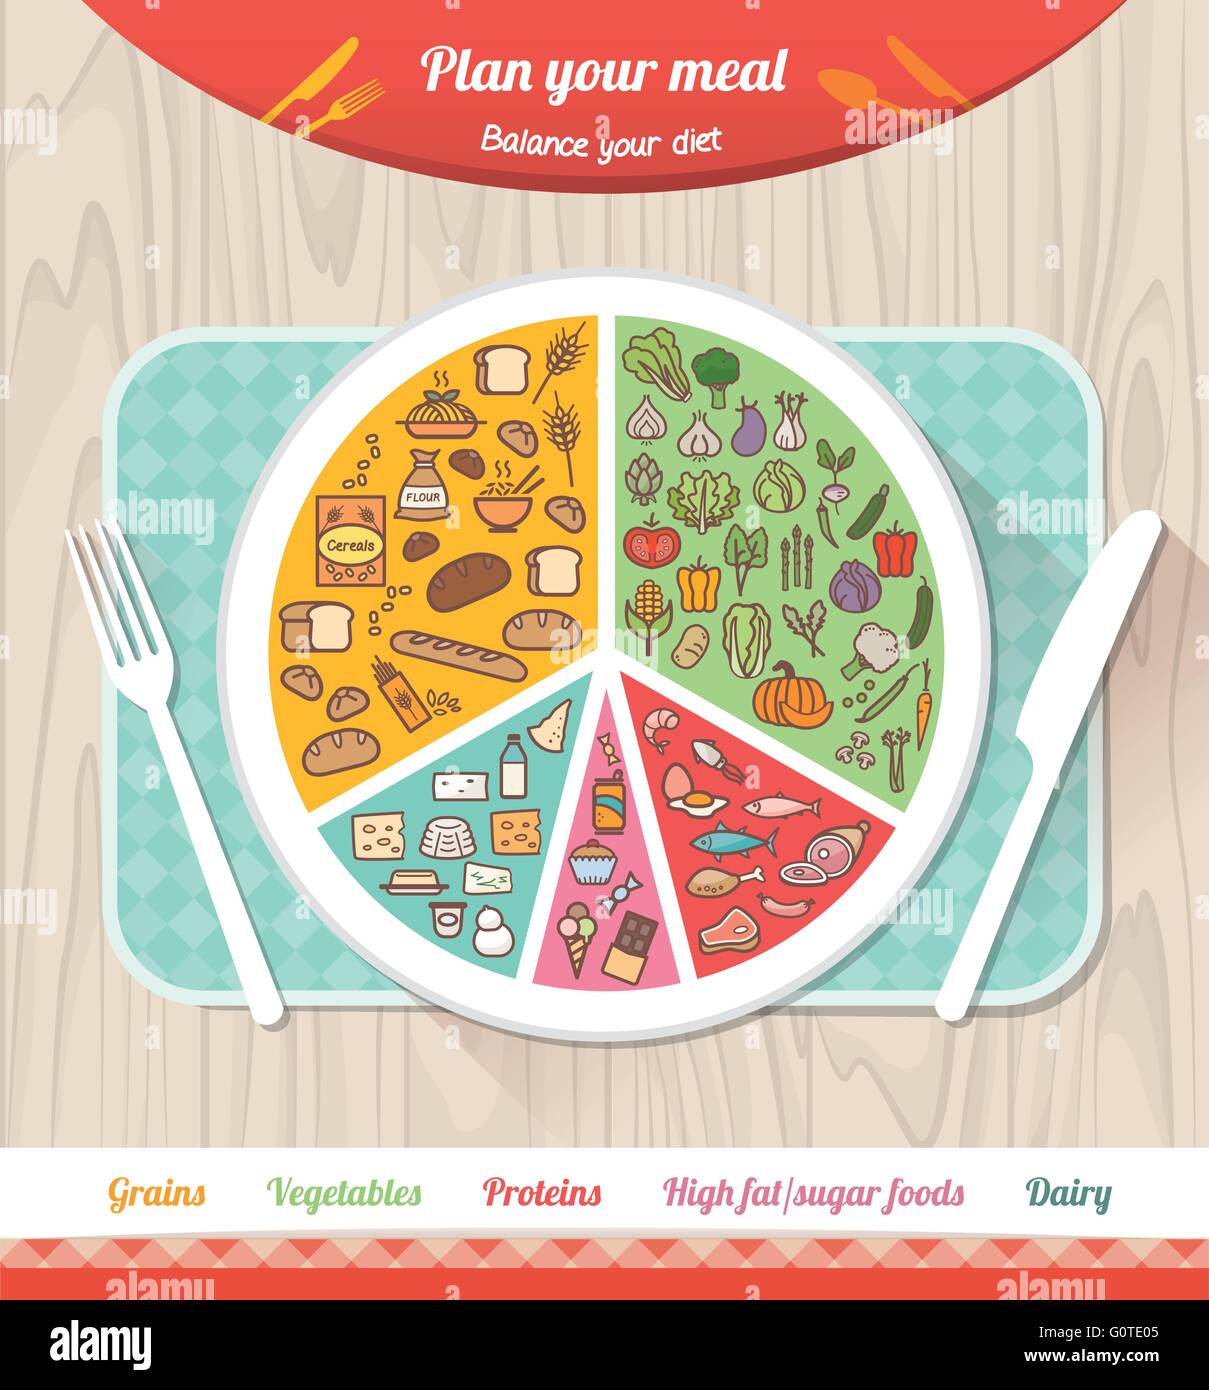 Plan your meal infographic with dish, chart and icons, healthy food and dieting concept Stock Vector